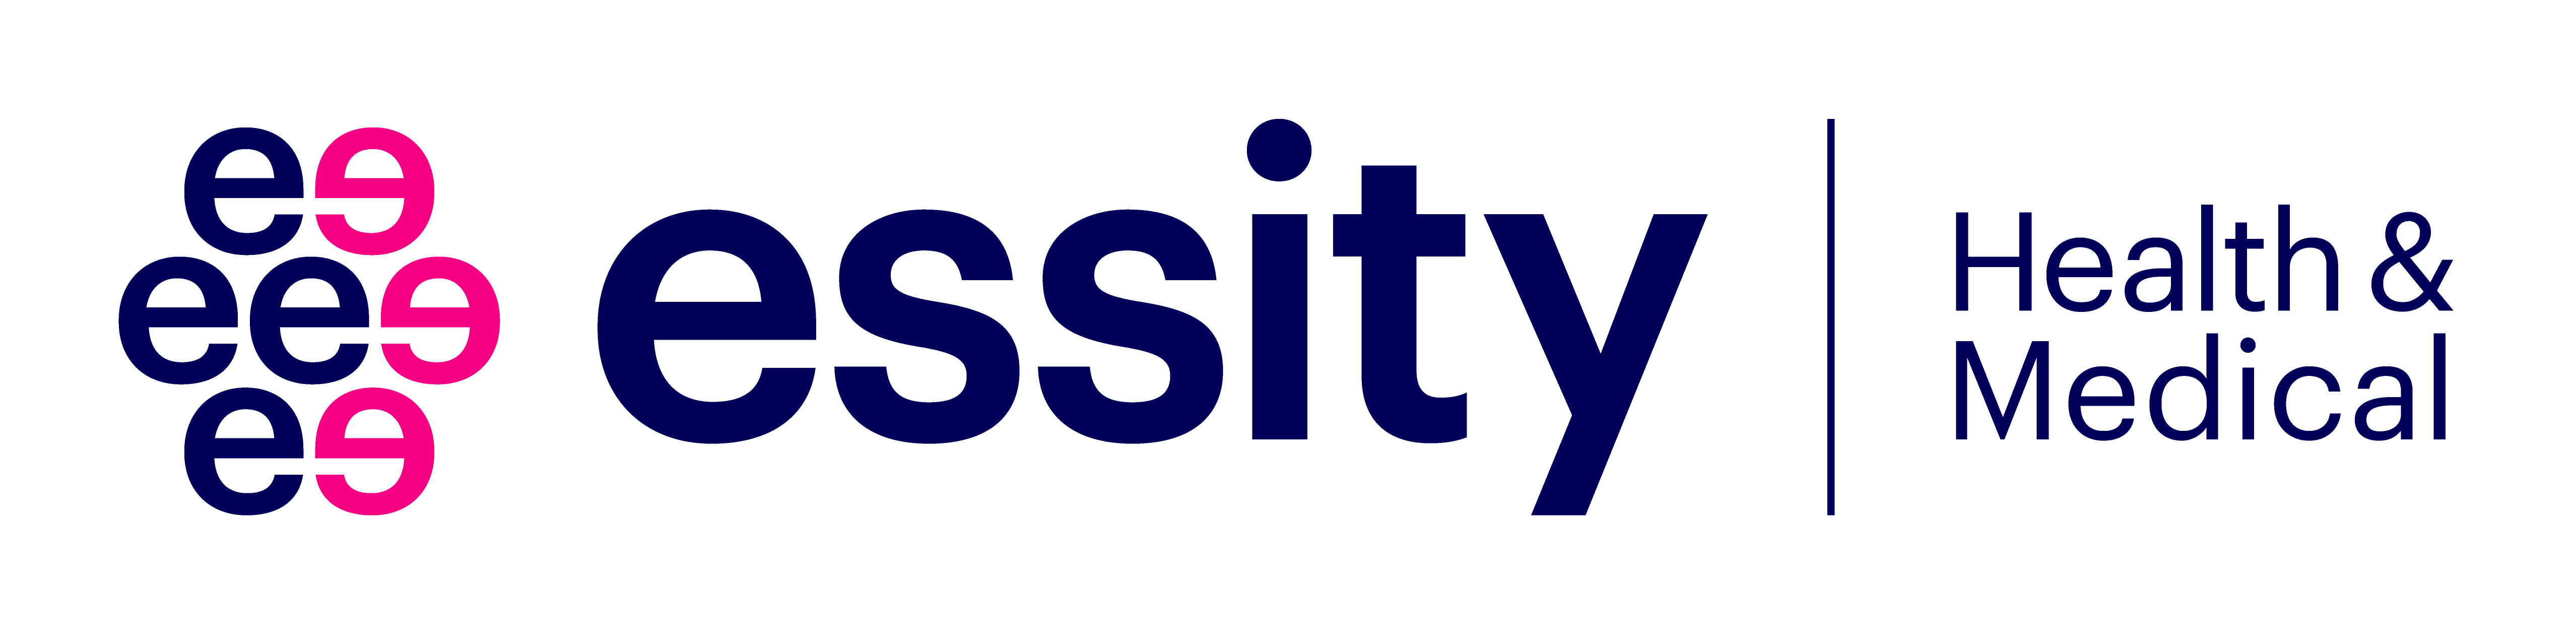 Essity-HM-Logo-office-primary-version.png